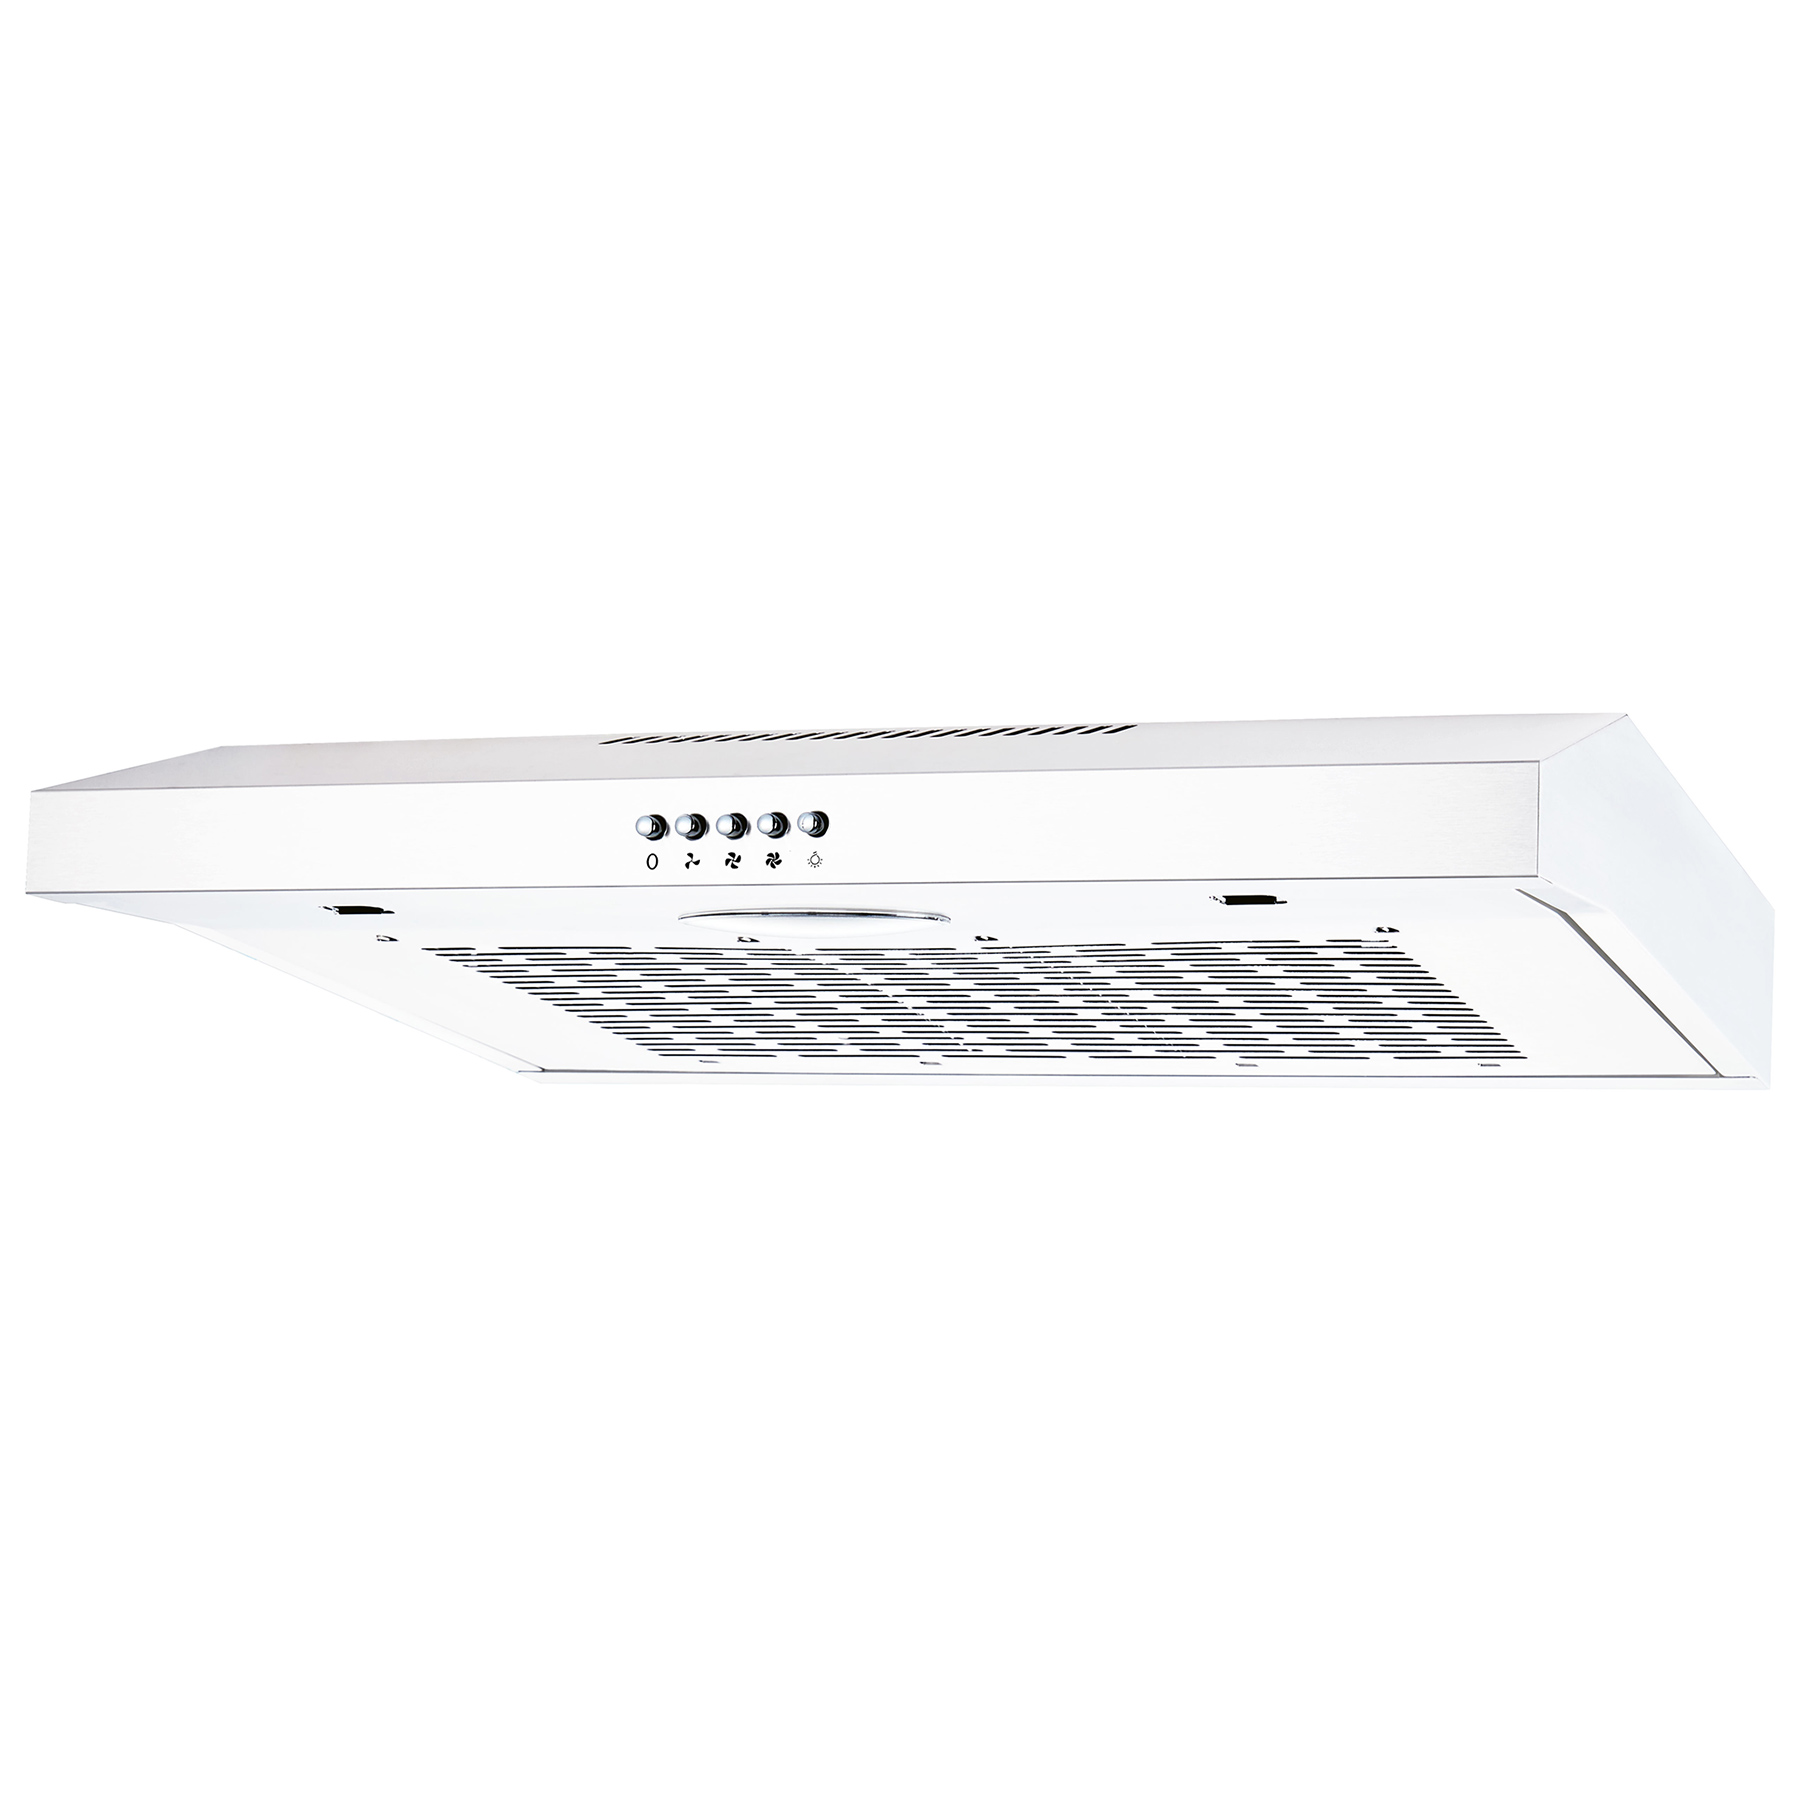 Image of Culina UBSVH60W 60cm Visor Extractor Hood in White 3 Speed Fan